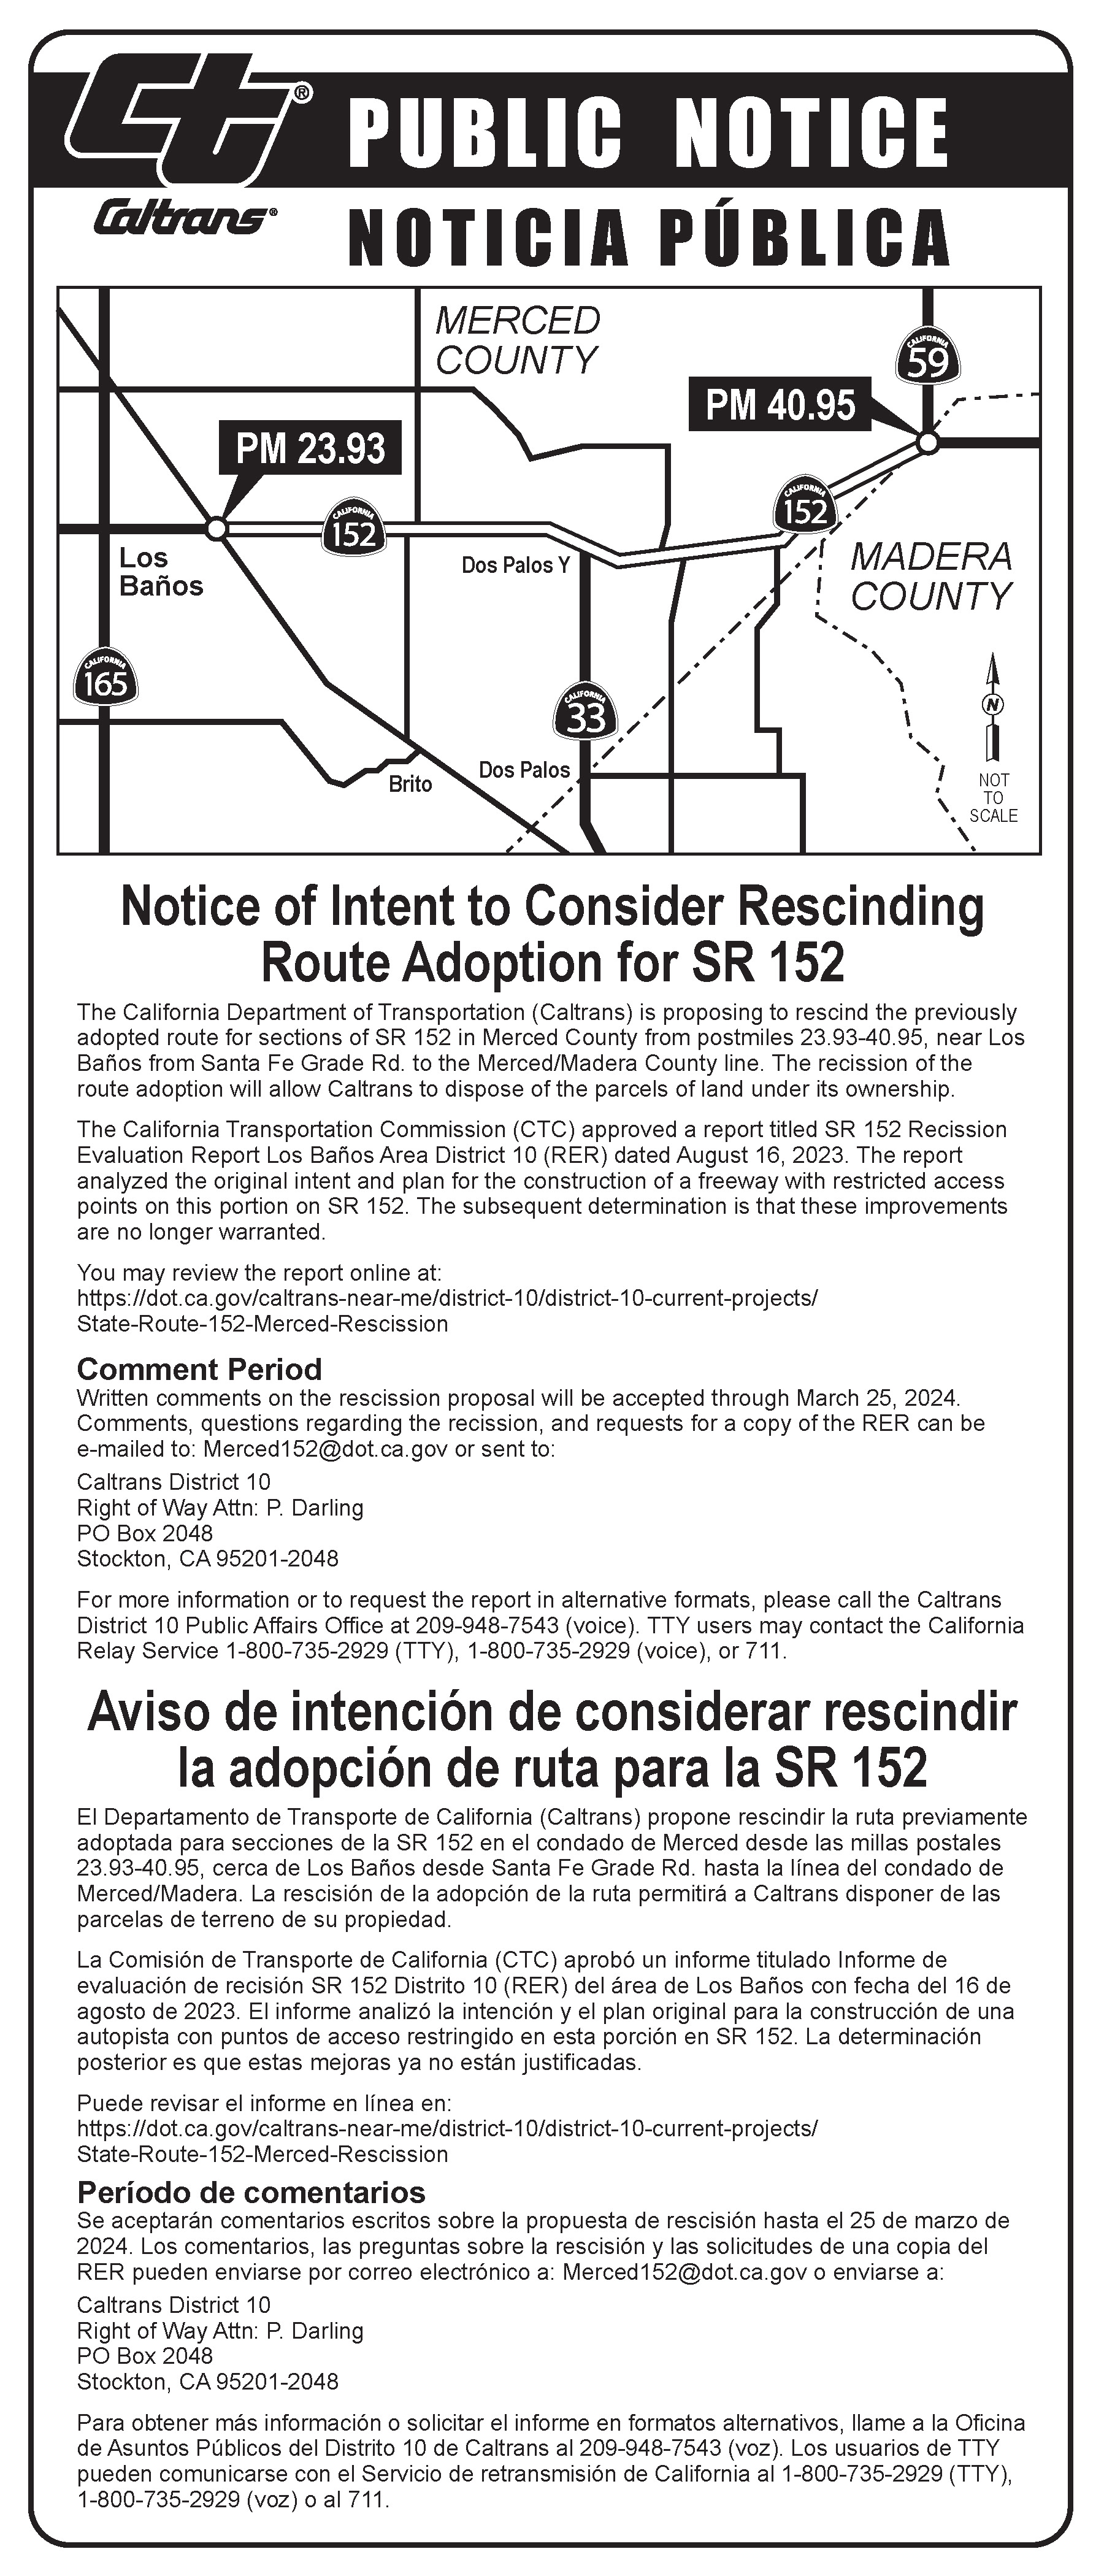 Public Notice Map in English and Spanish